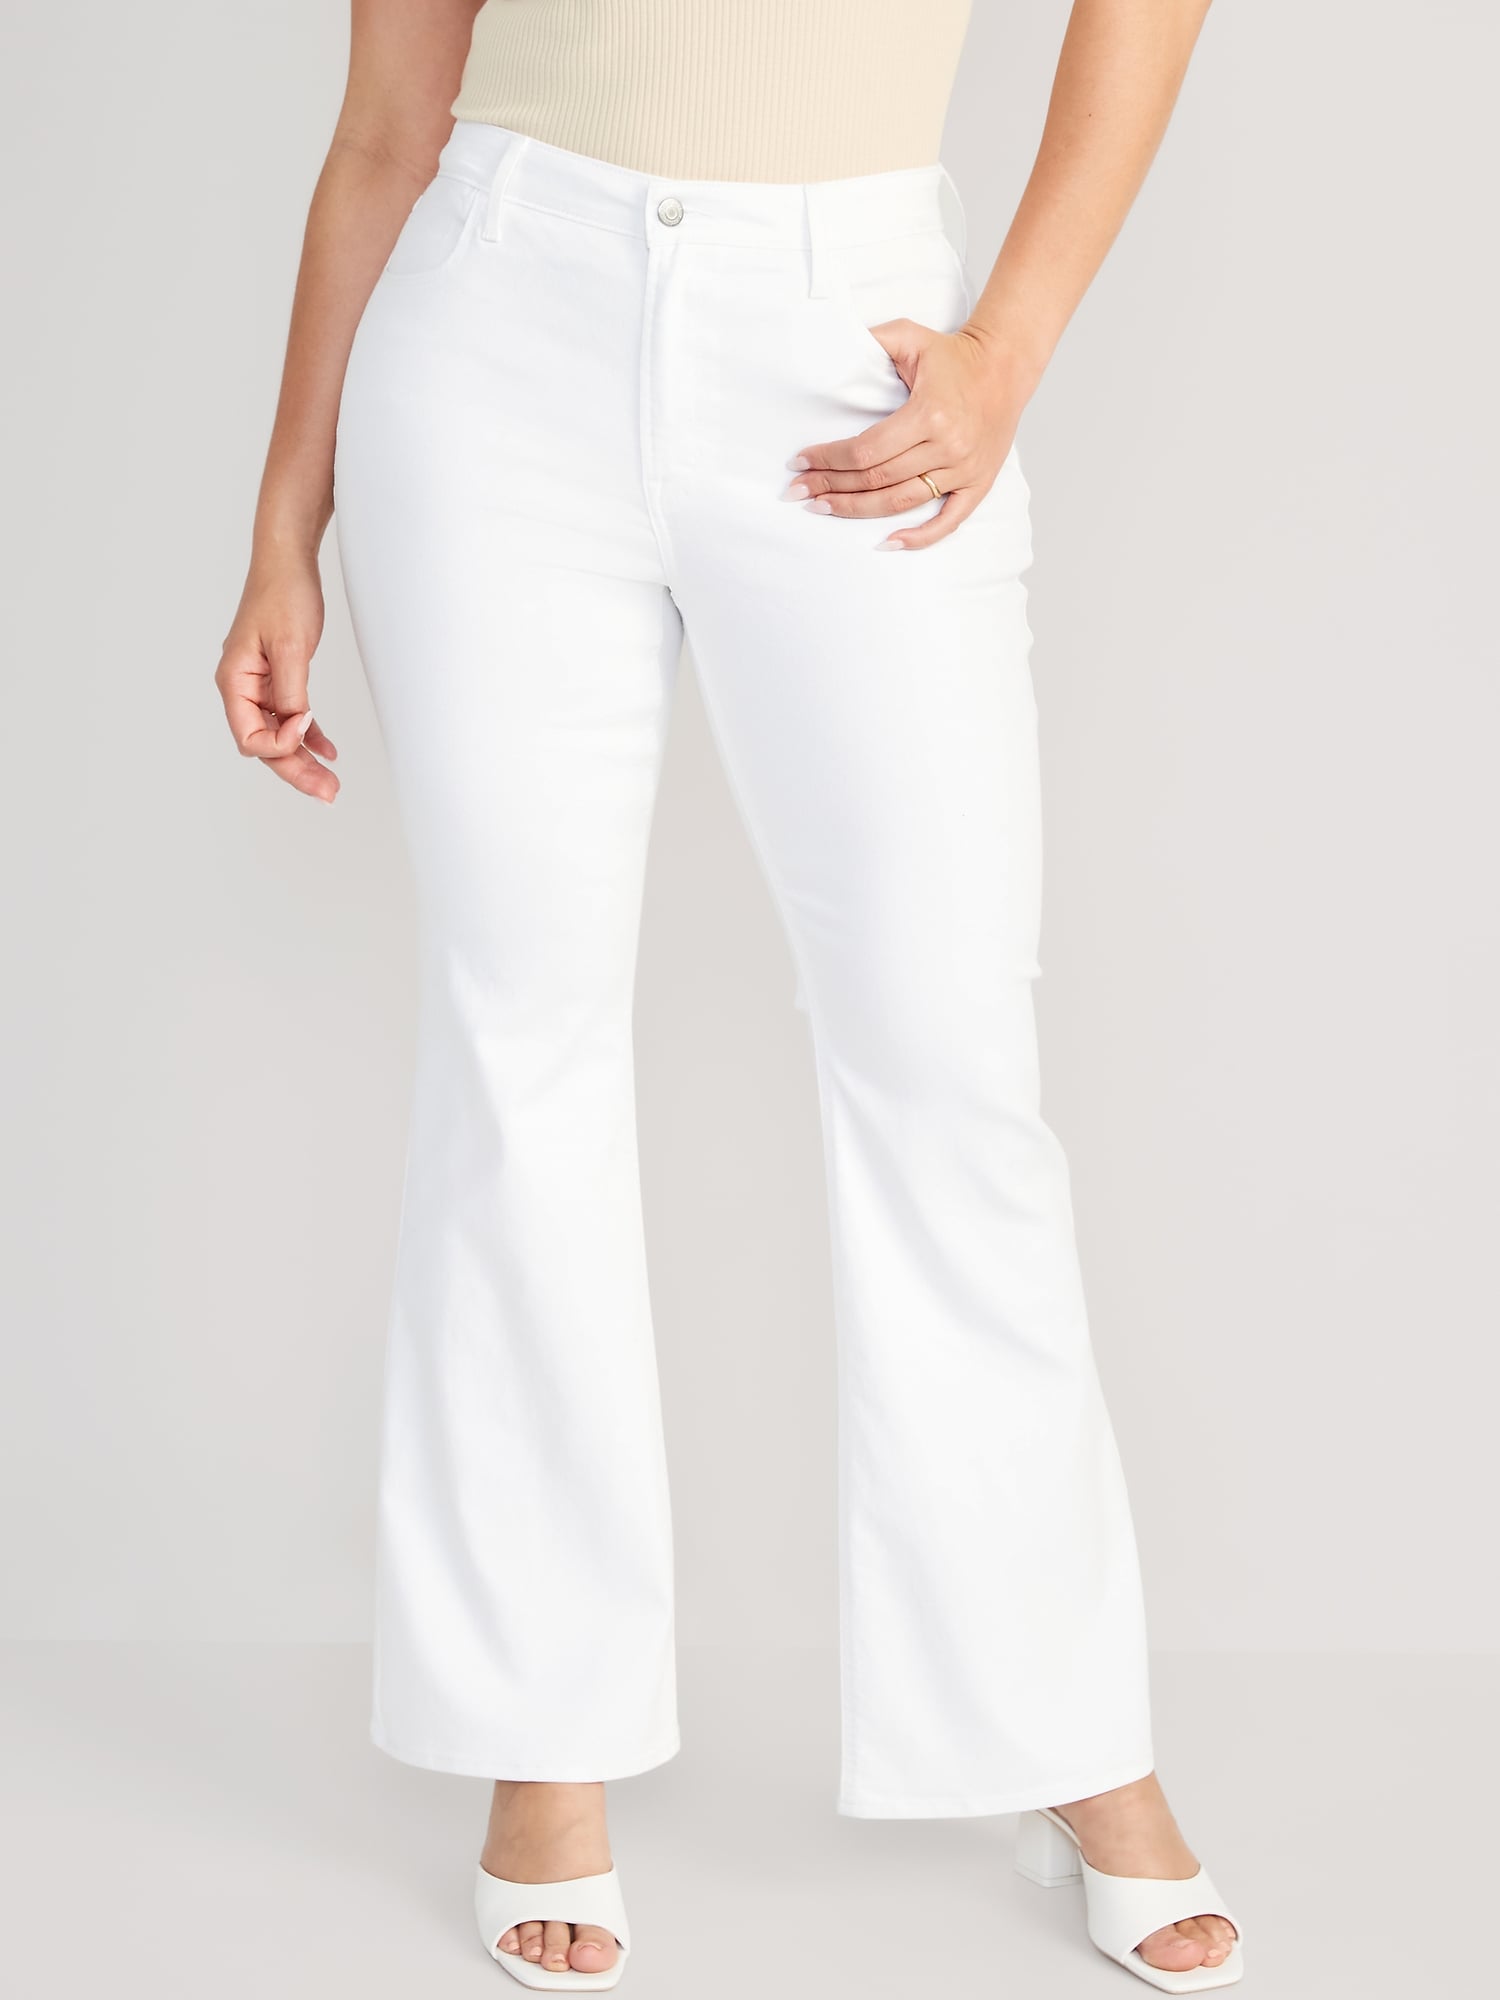 High Waist White Flare Pants, Pants for Women, Office Meeting Pants, White  Formal Pants, Trousers Women - Etsy India